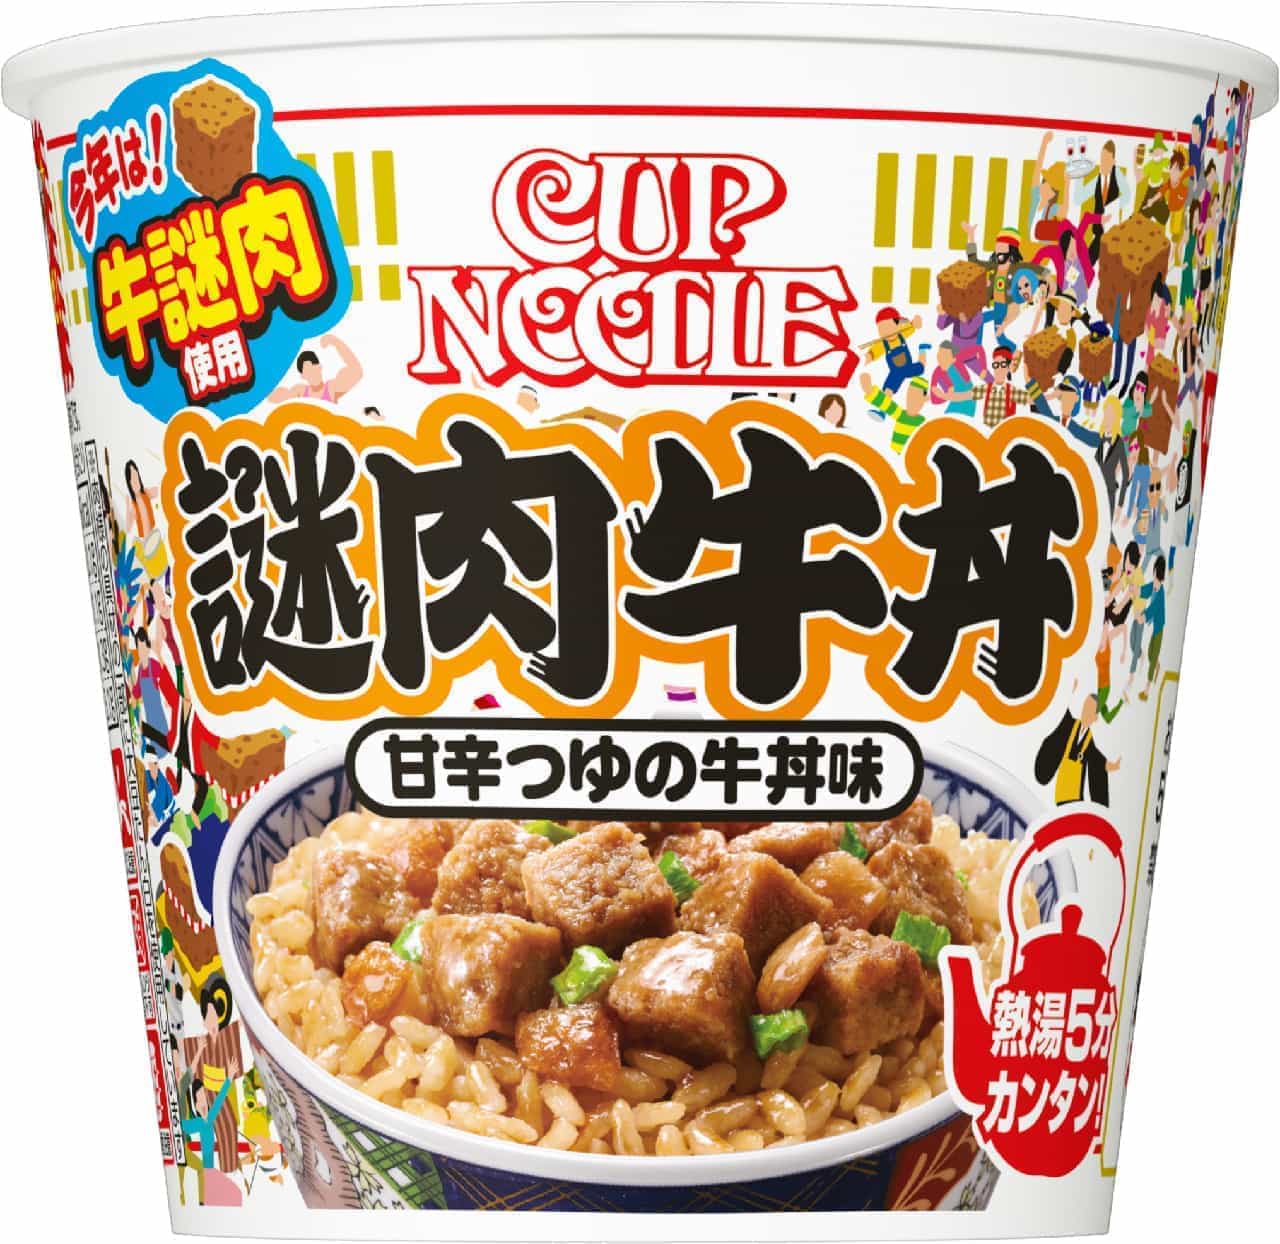 Nissin Foods "Cup Noodle Mysterious Beef Bowl"